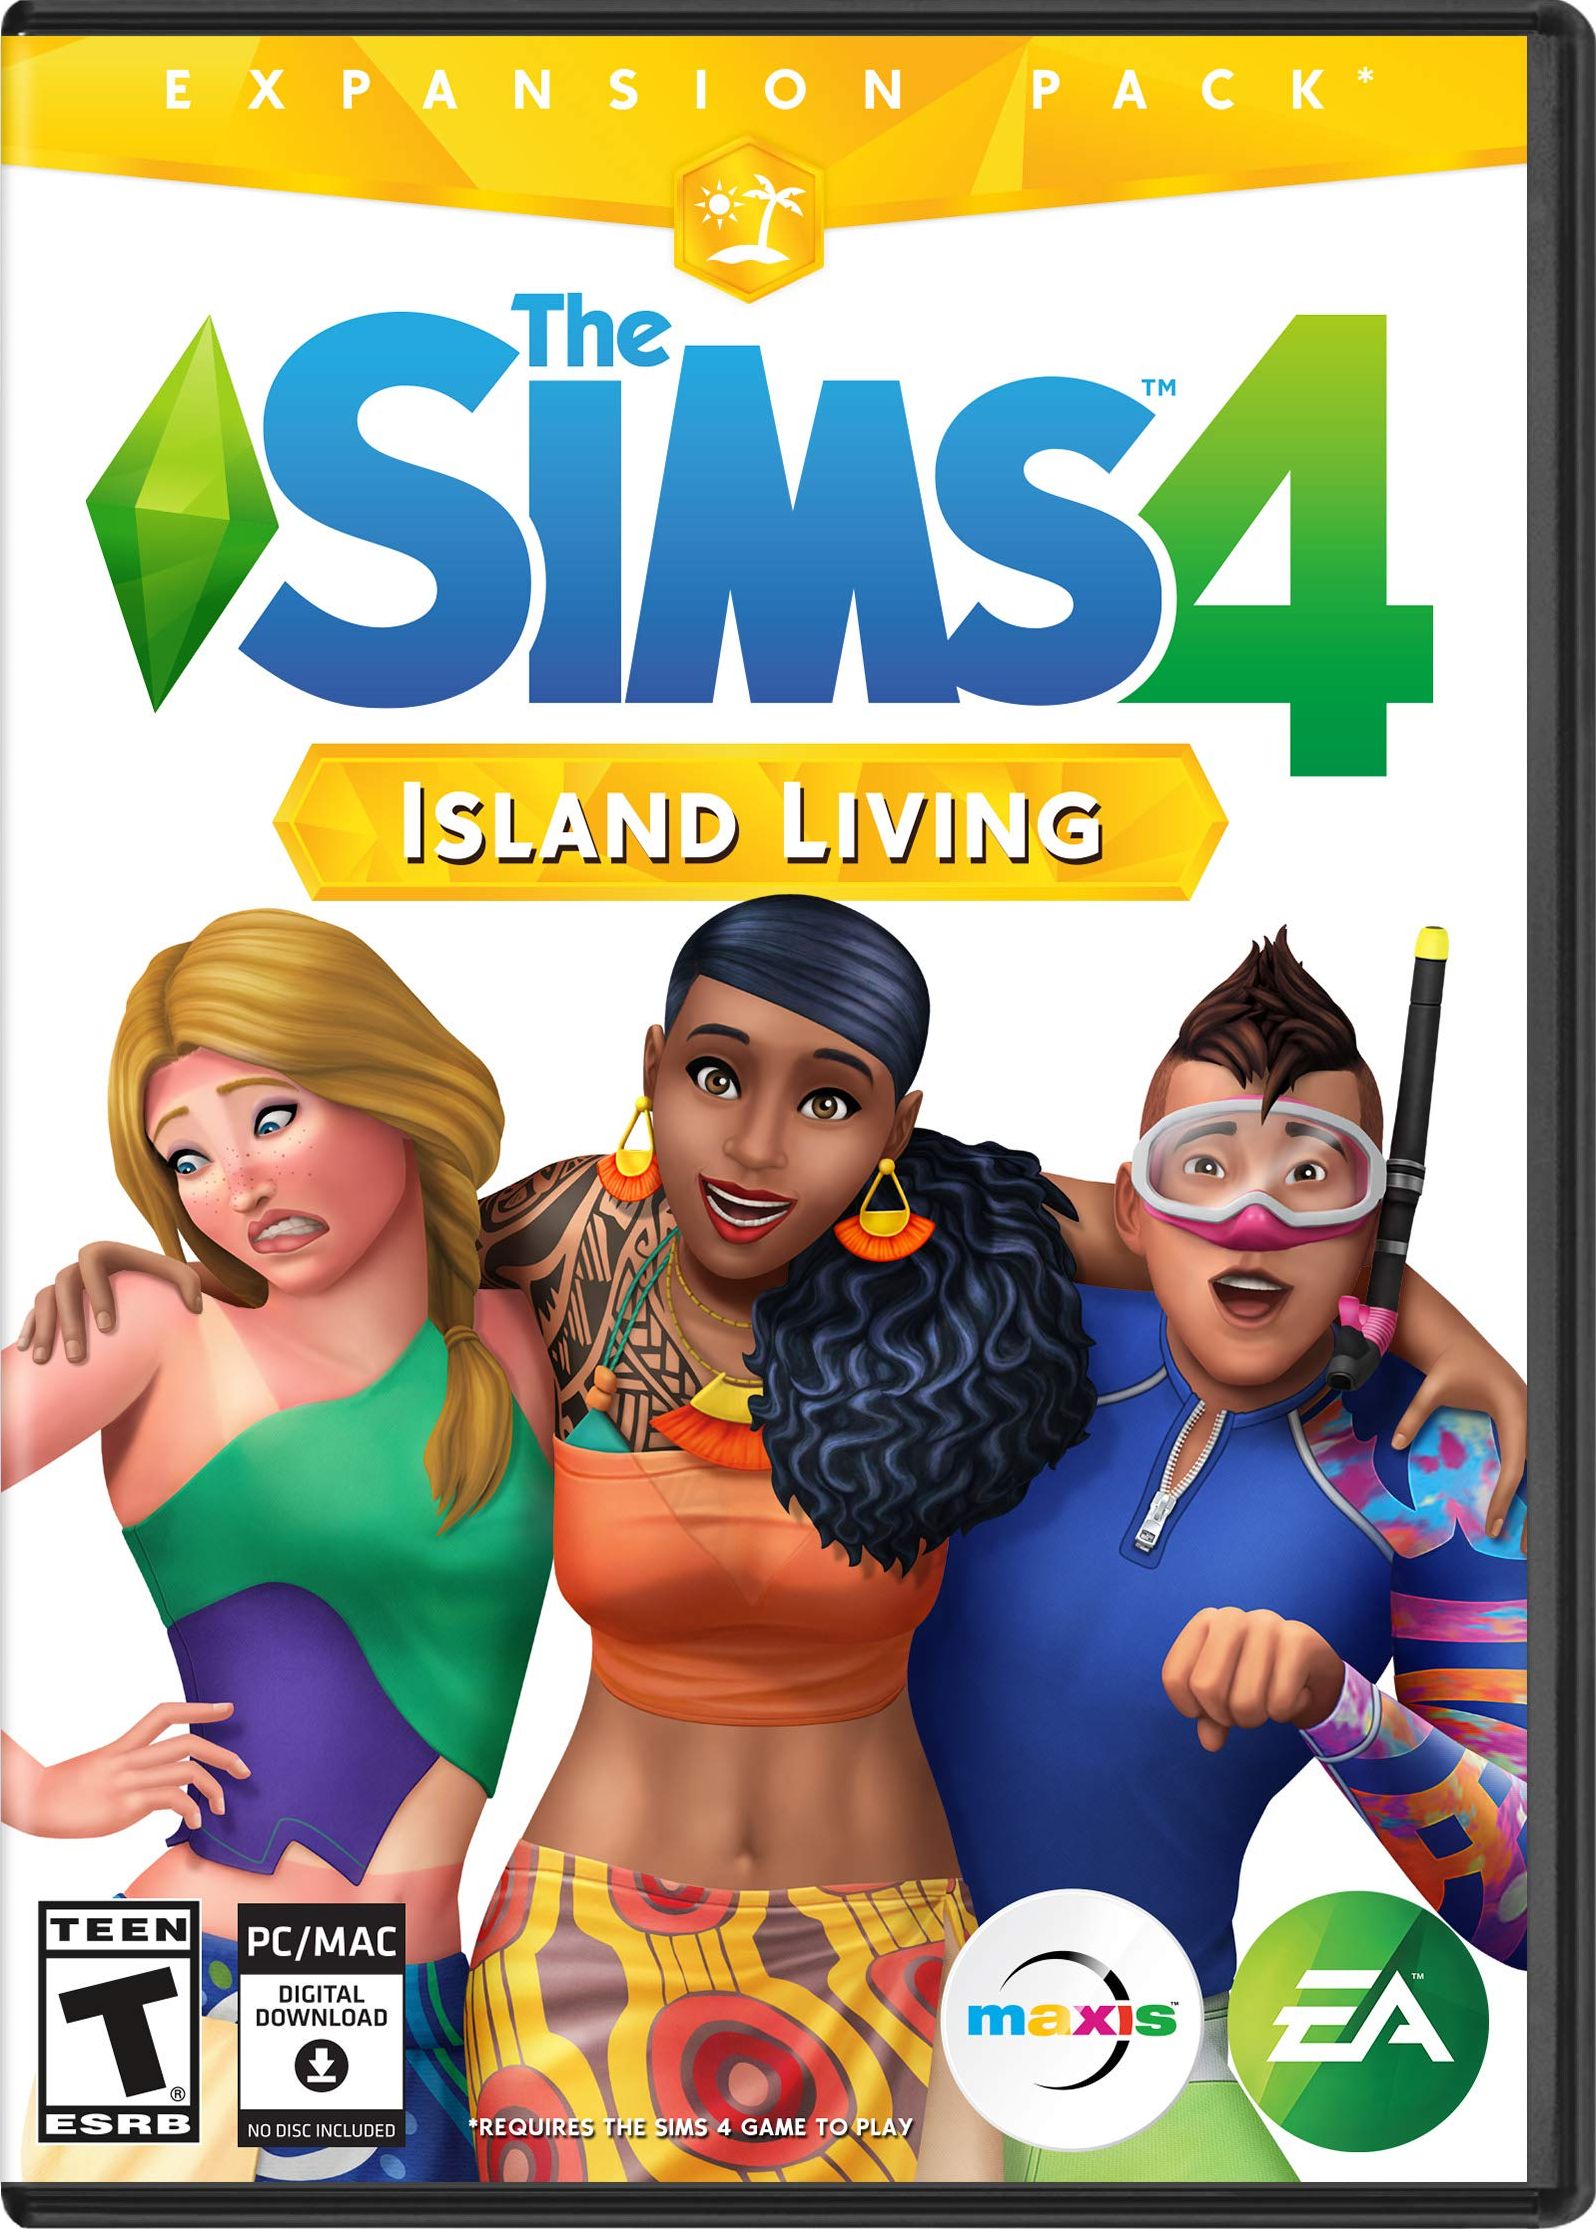 The Sims 4 Island Living Release Date (PC)